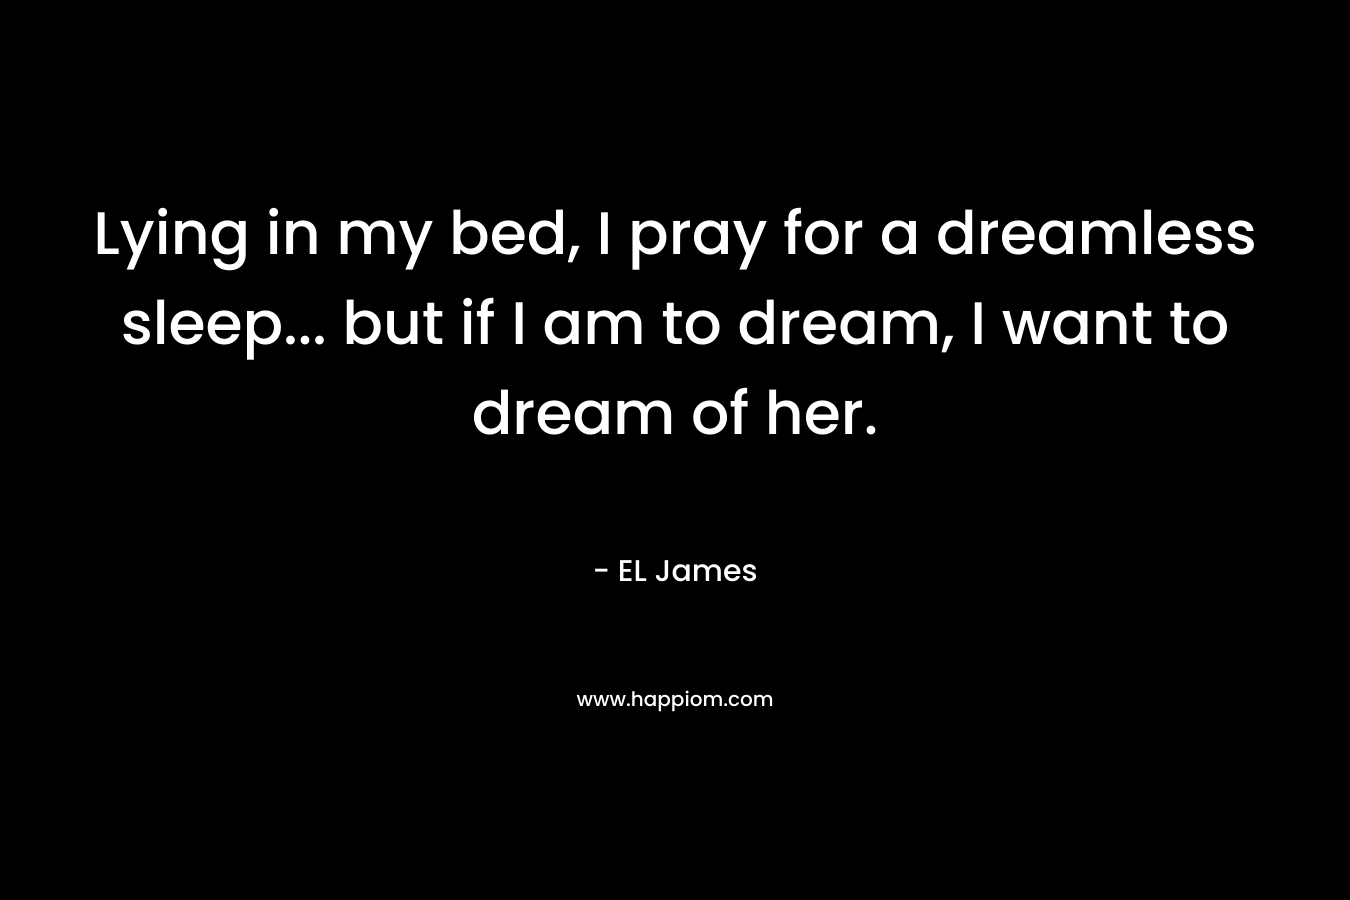 Lying in my bed, I pray for a dreamless sleep… but if I am to dream, I want to dream of her. – EL James